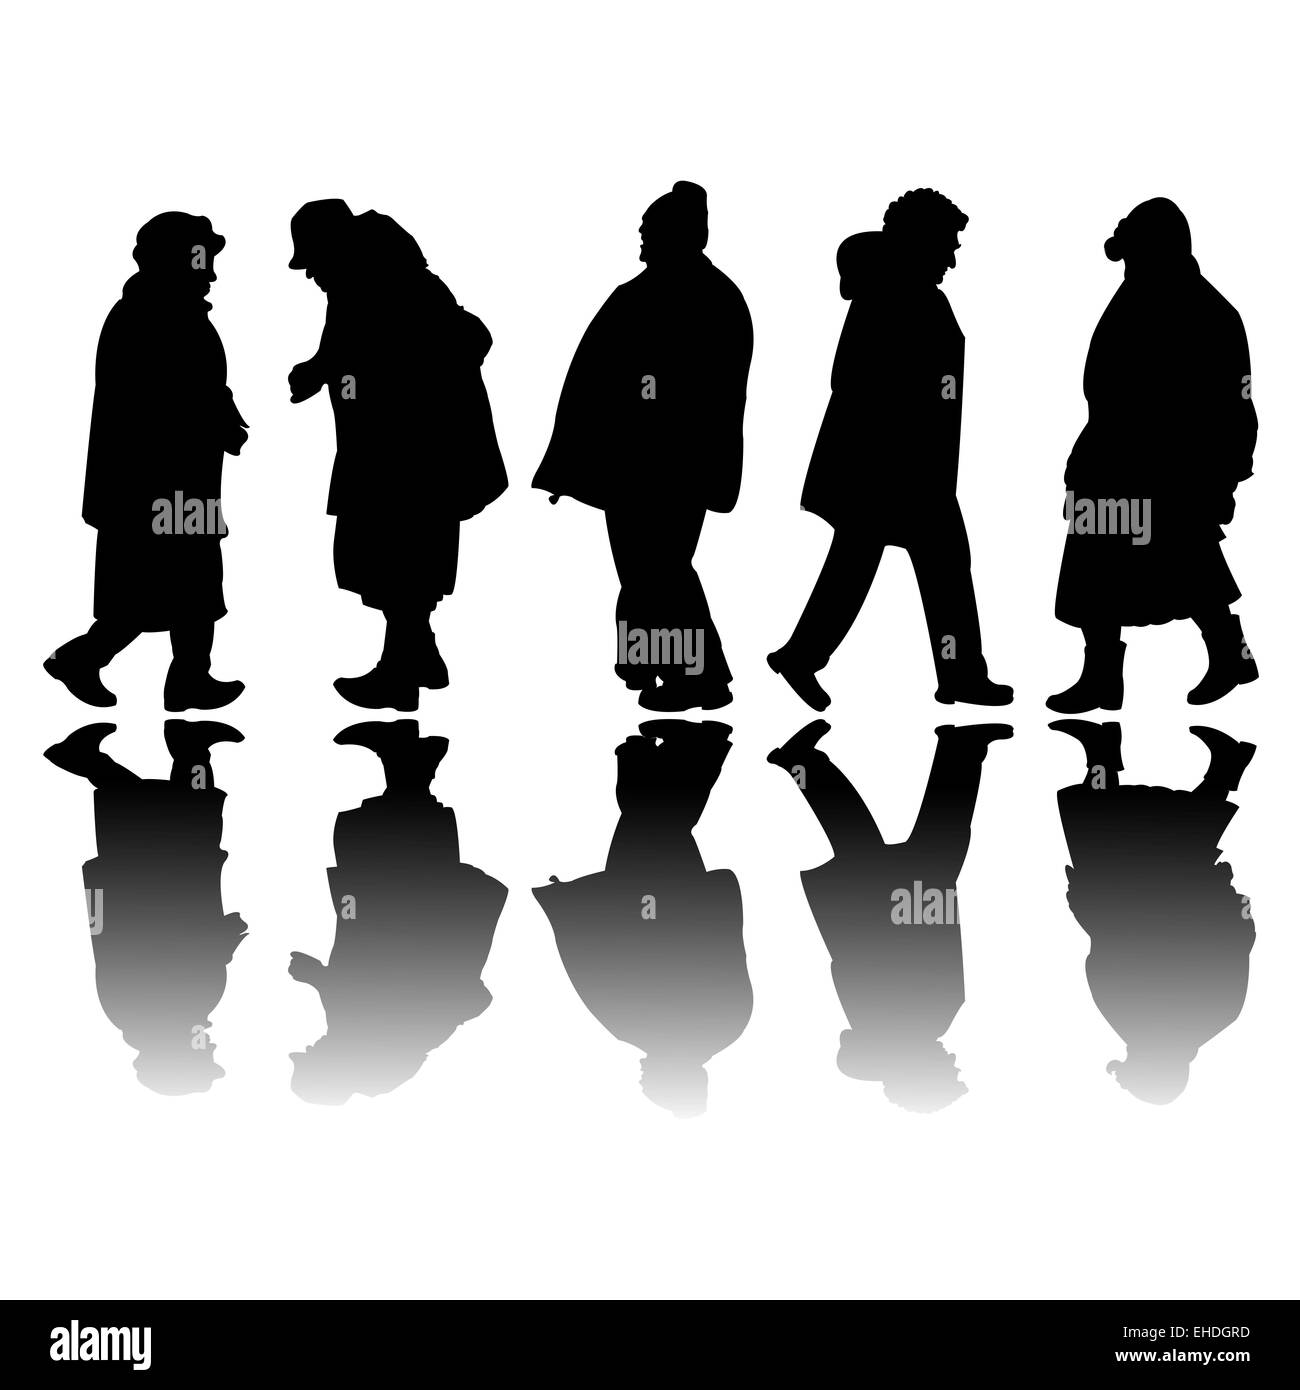 old people black silhouettes Stock Photo